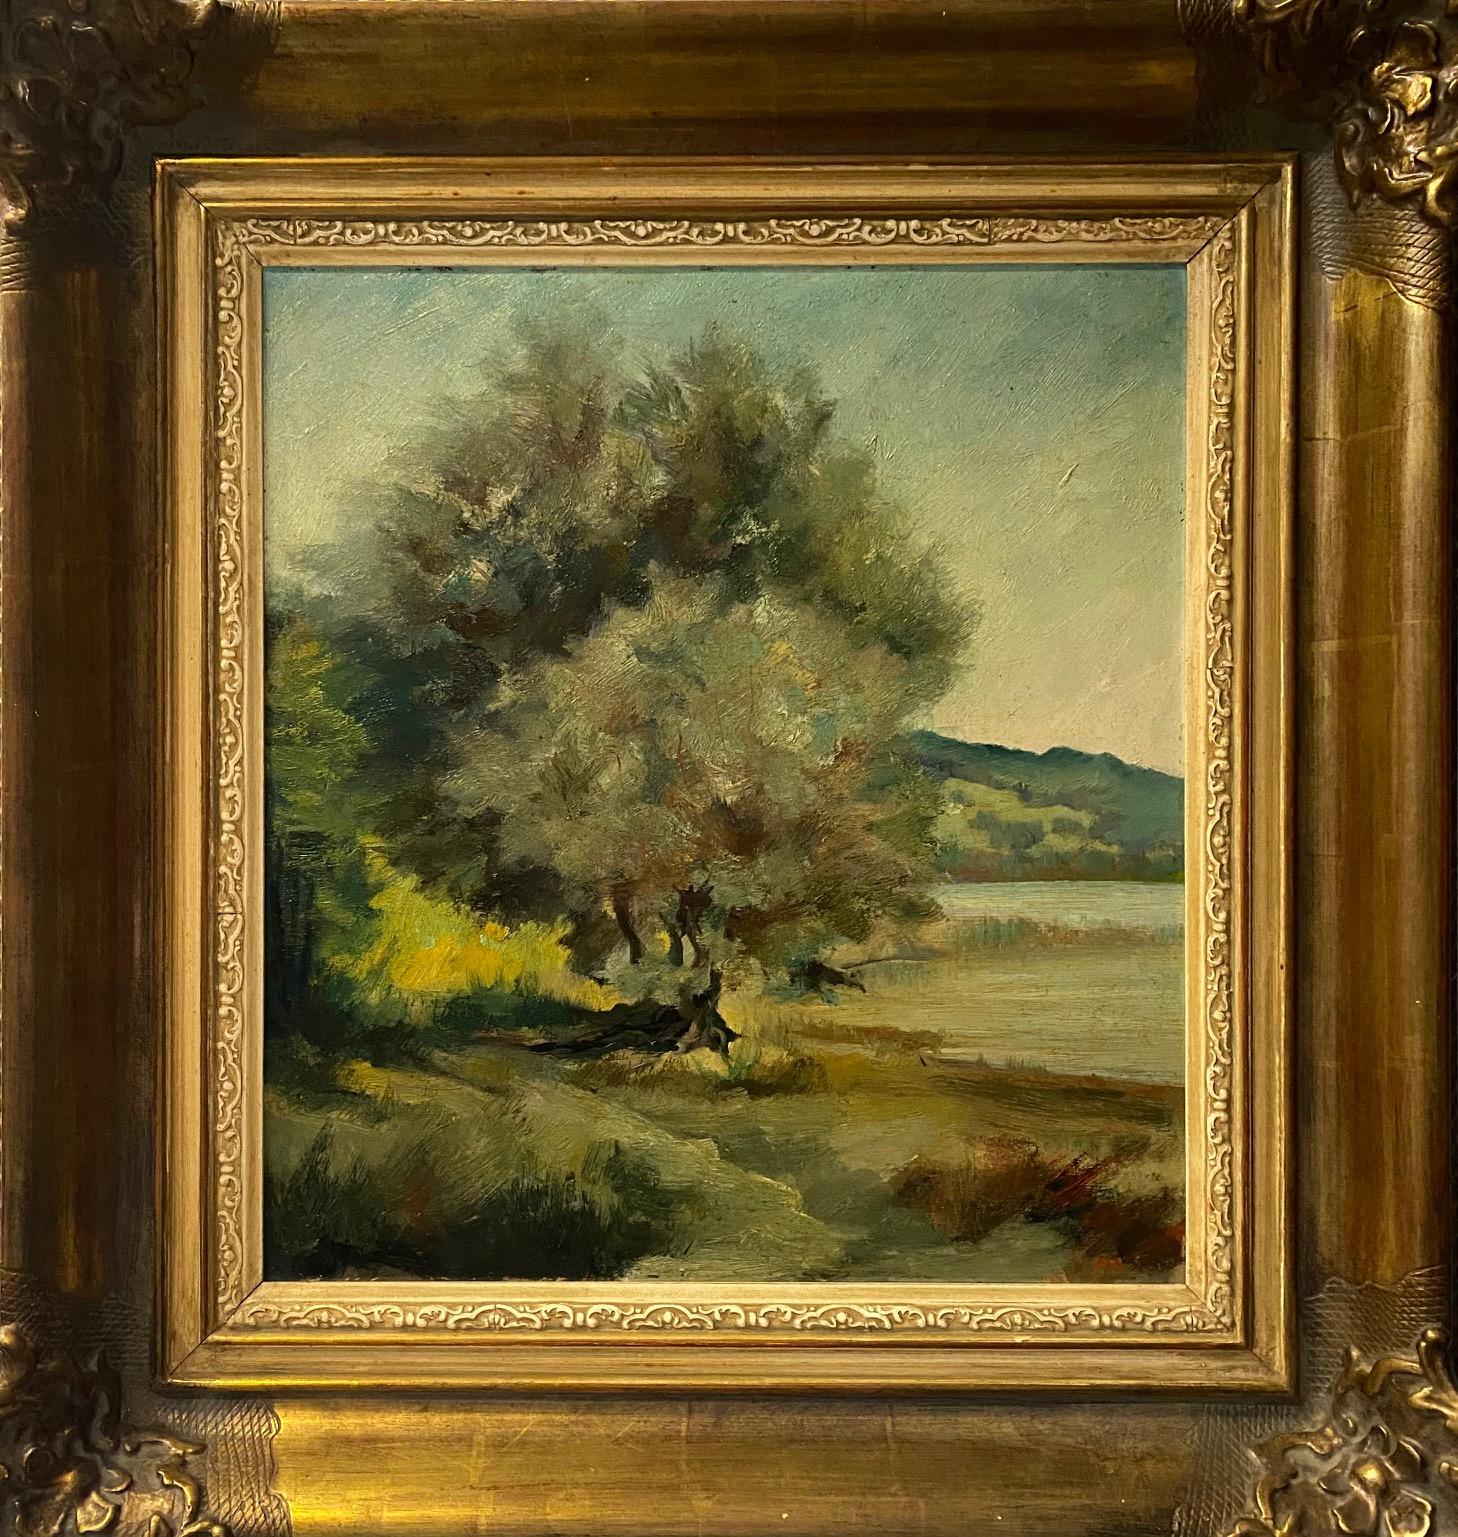 "Tree by the lake" by Hans Hotz - Oil on cardboard 35x39 cm